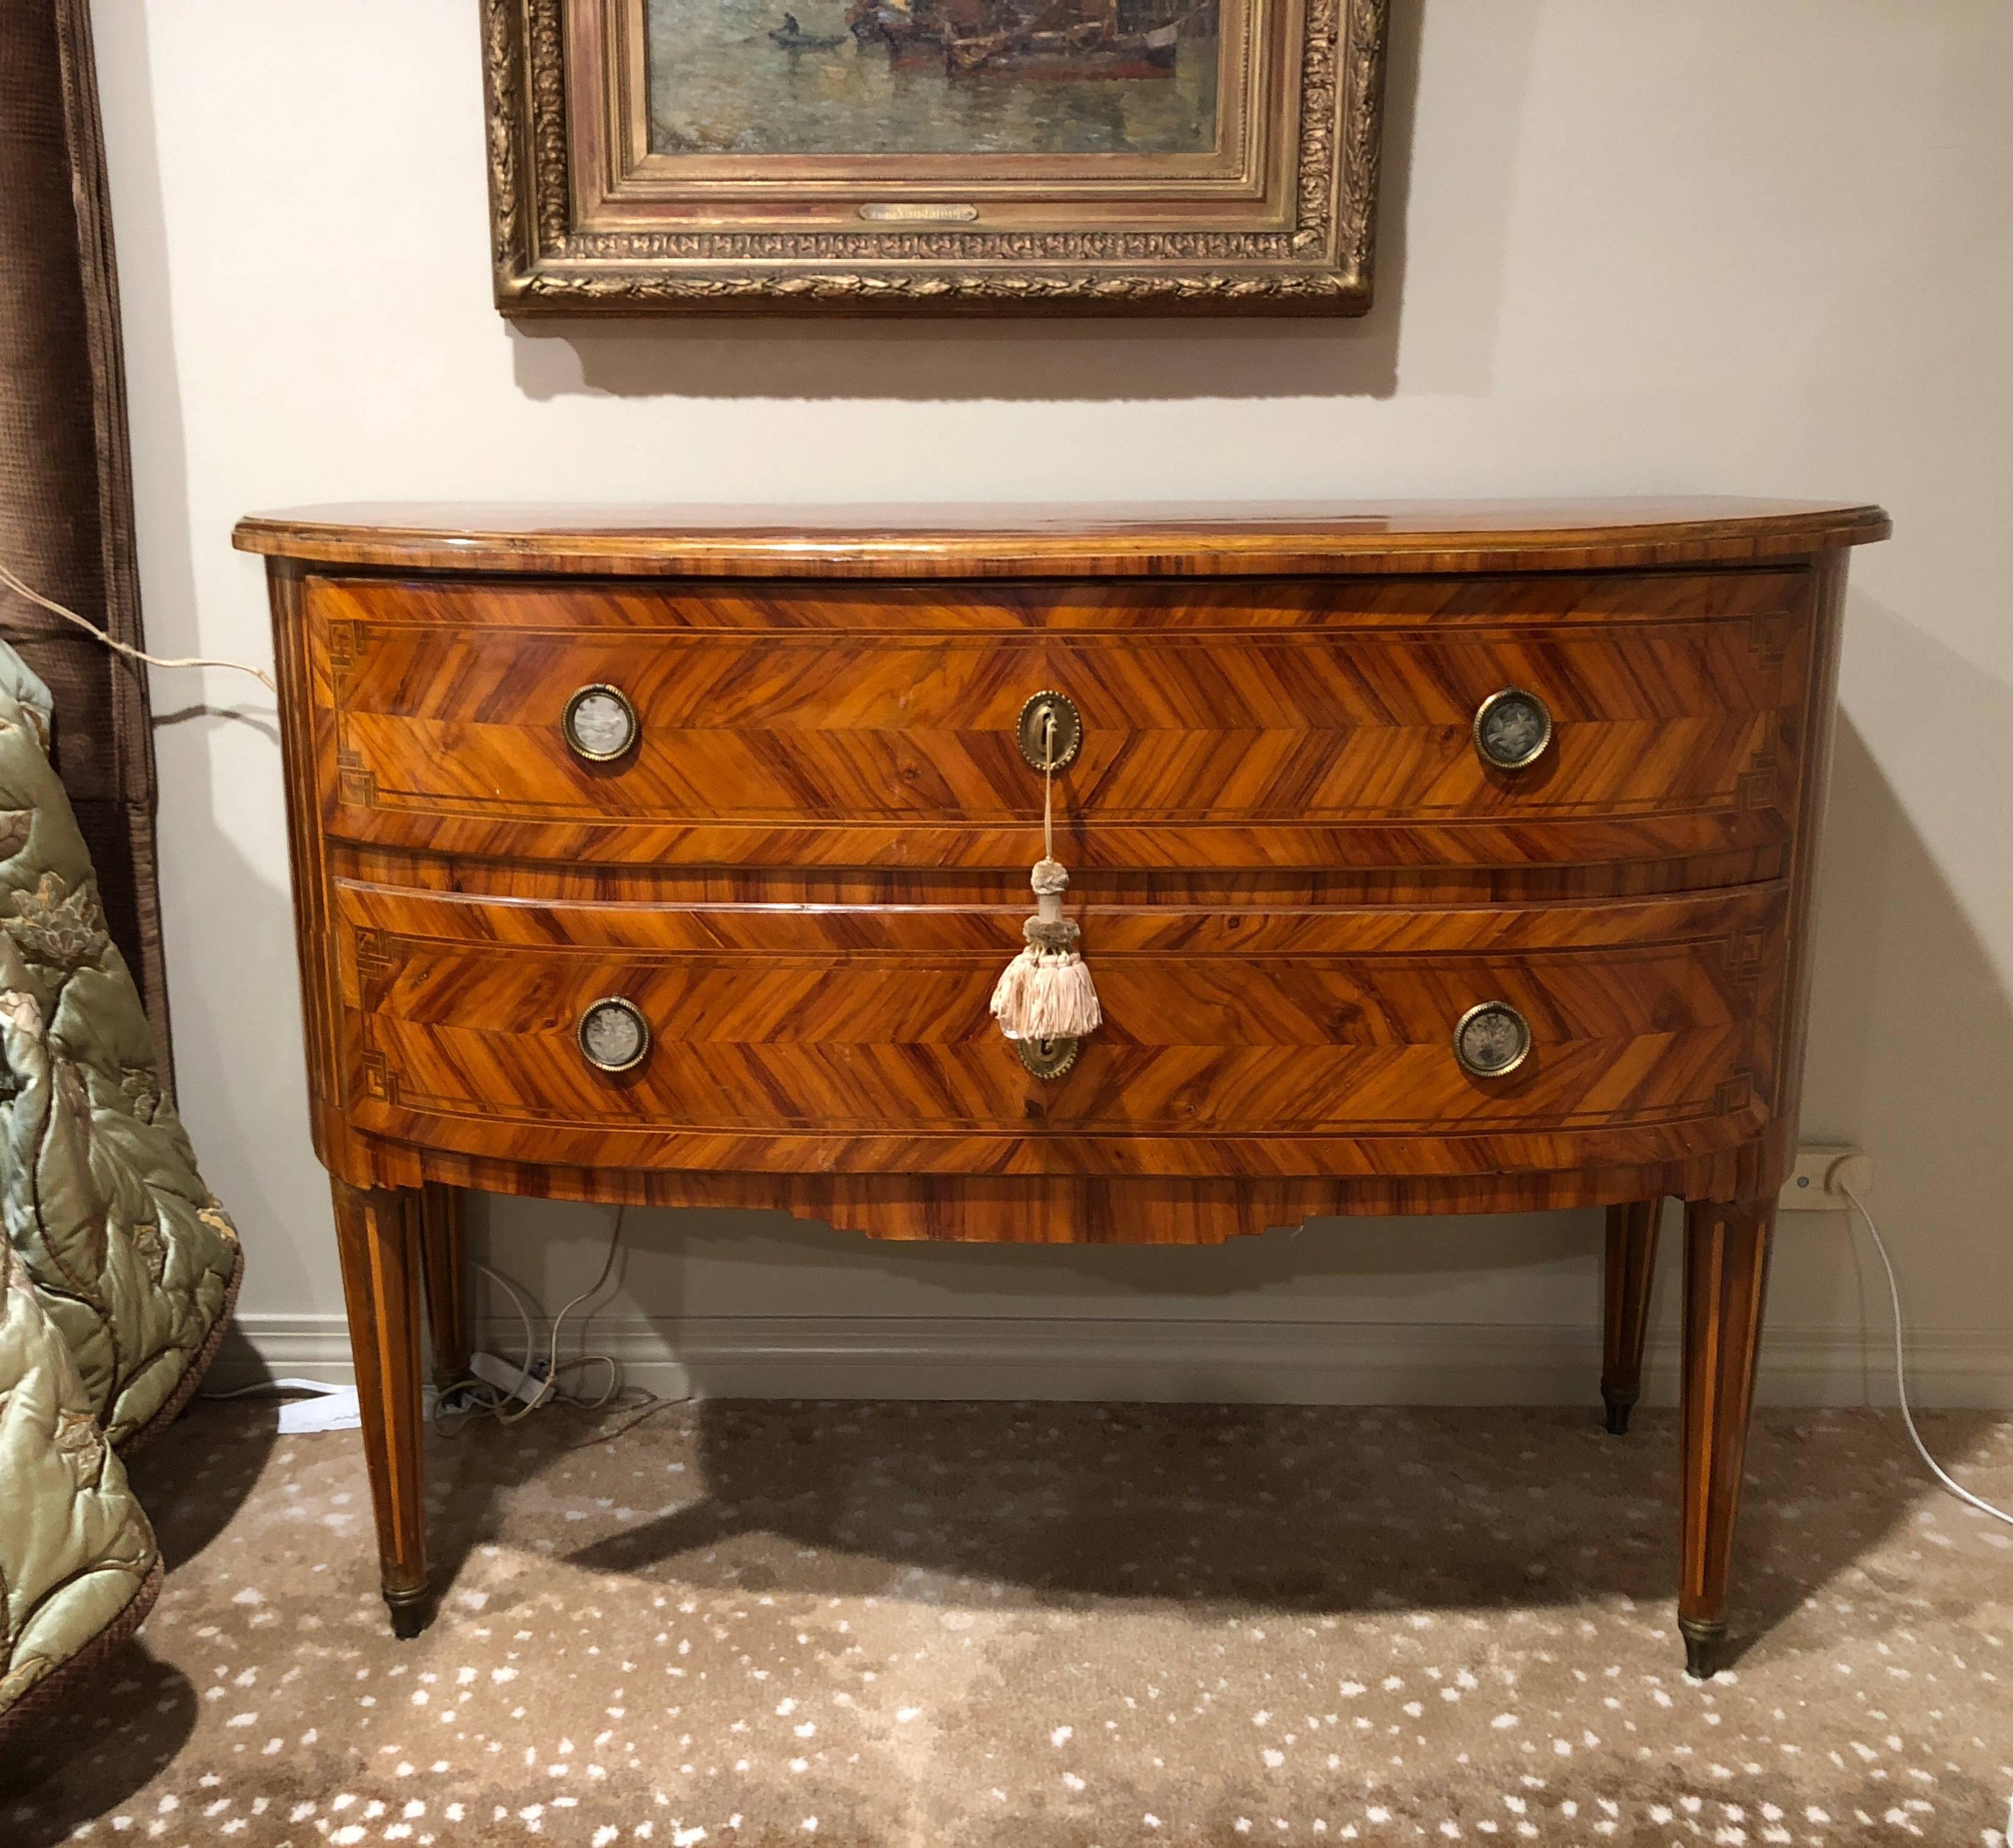 Exceptional pair of Italian Louis XVI with marquetry of kingwood and tulipwood. Unusual Venetian mirrored pulls with birds and flowers.
Two drawers with bowed front on four inlaid legs with bronze sabot.
   